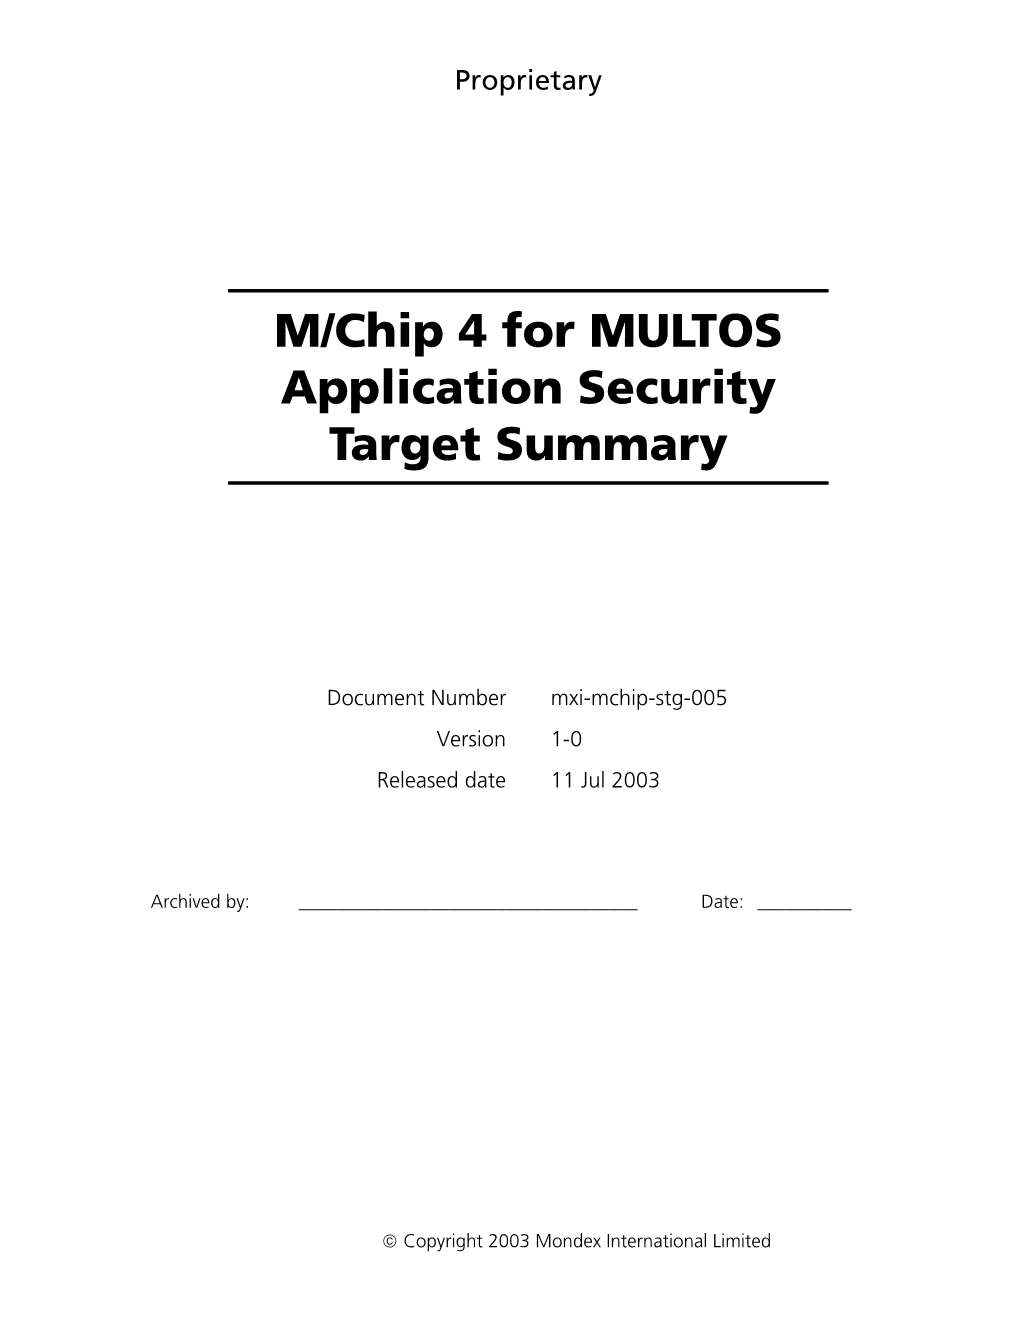 M/Chip 4 for MULTOS Application Security Target Summary